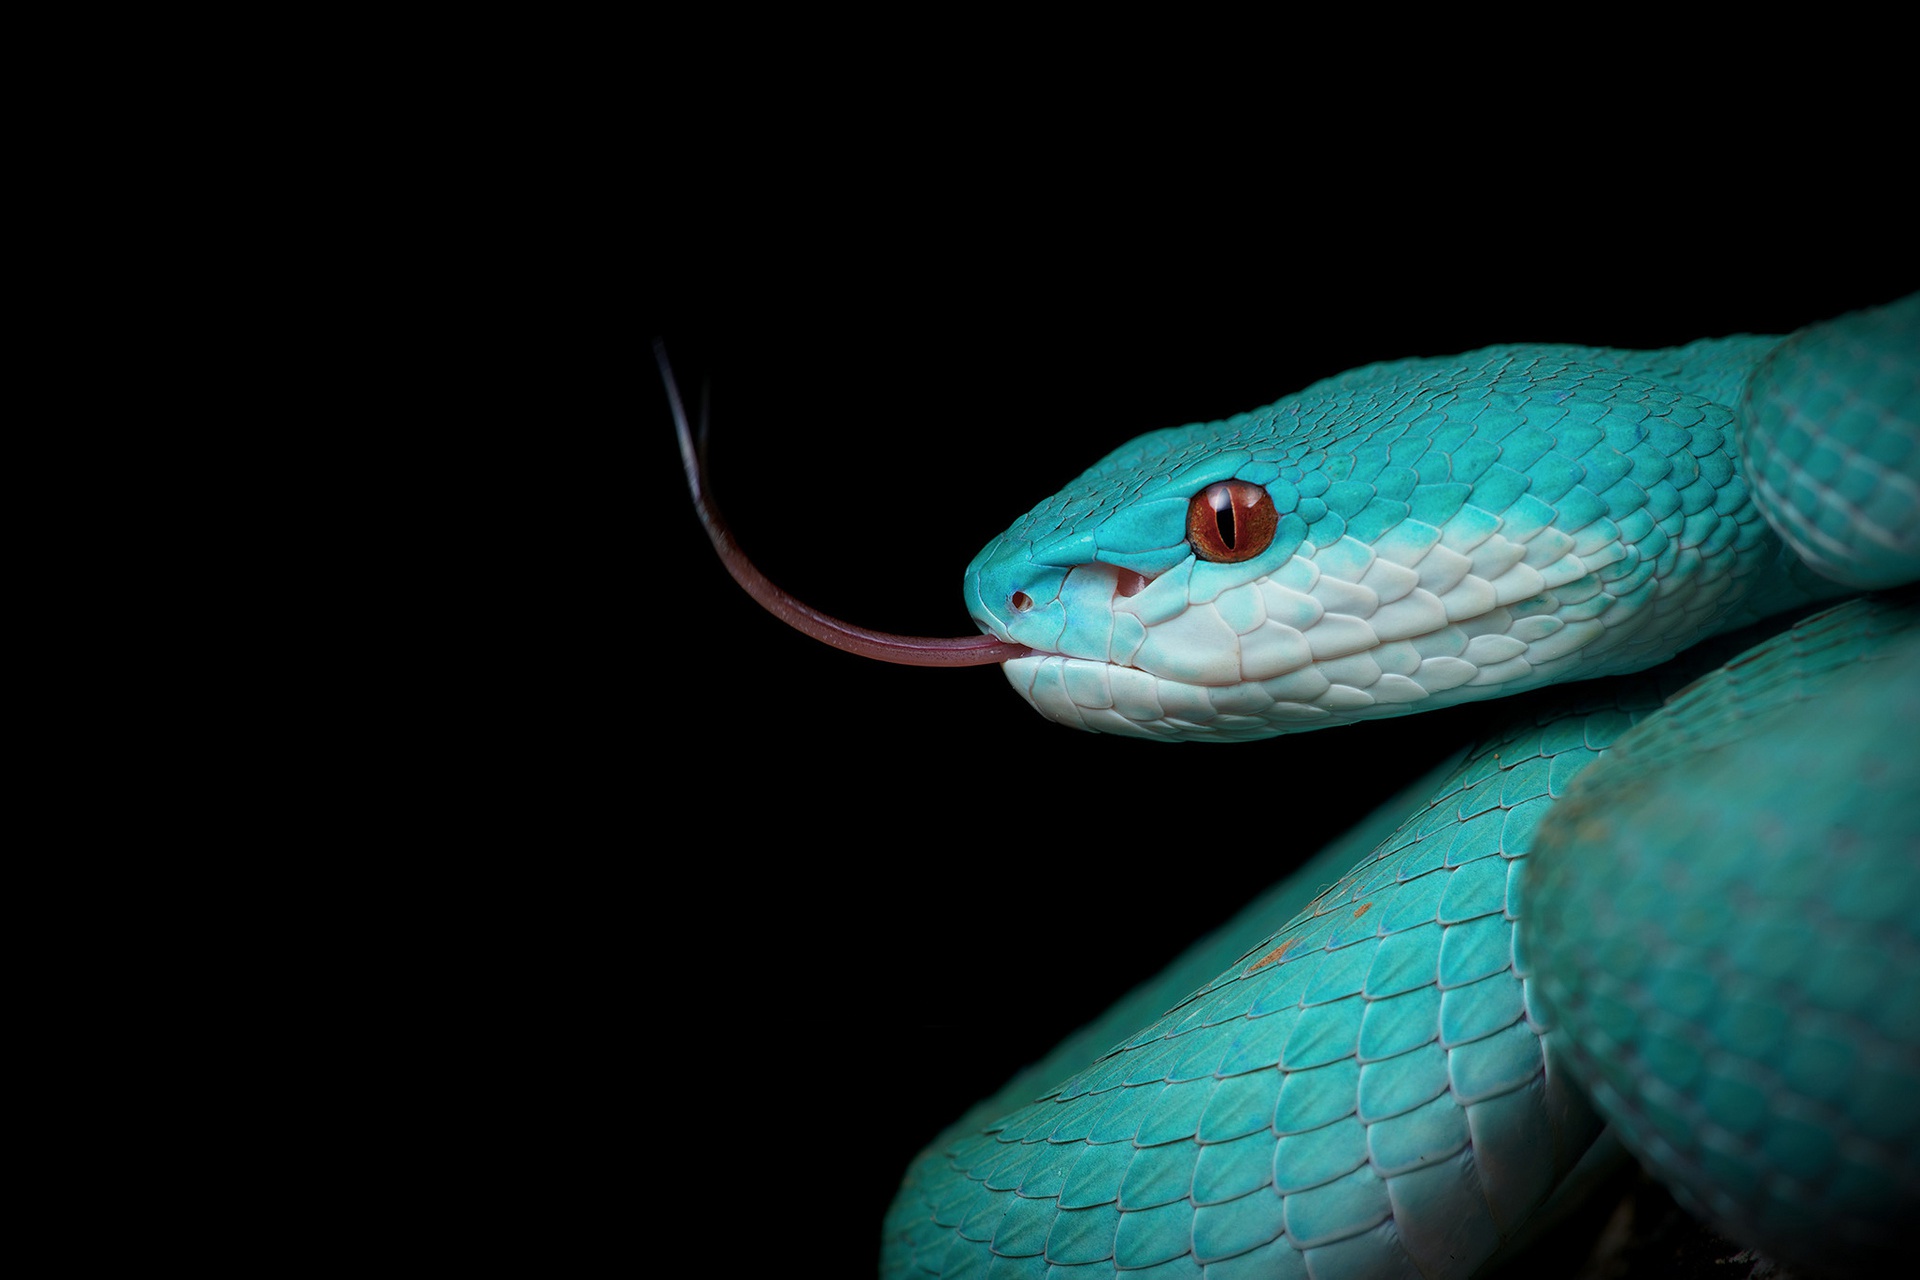 General 1920x1280 black background simple background tongue out snake reptiles animals cyan turquoise